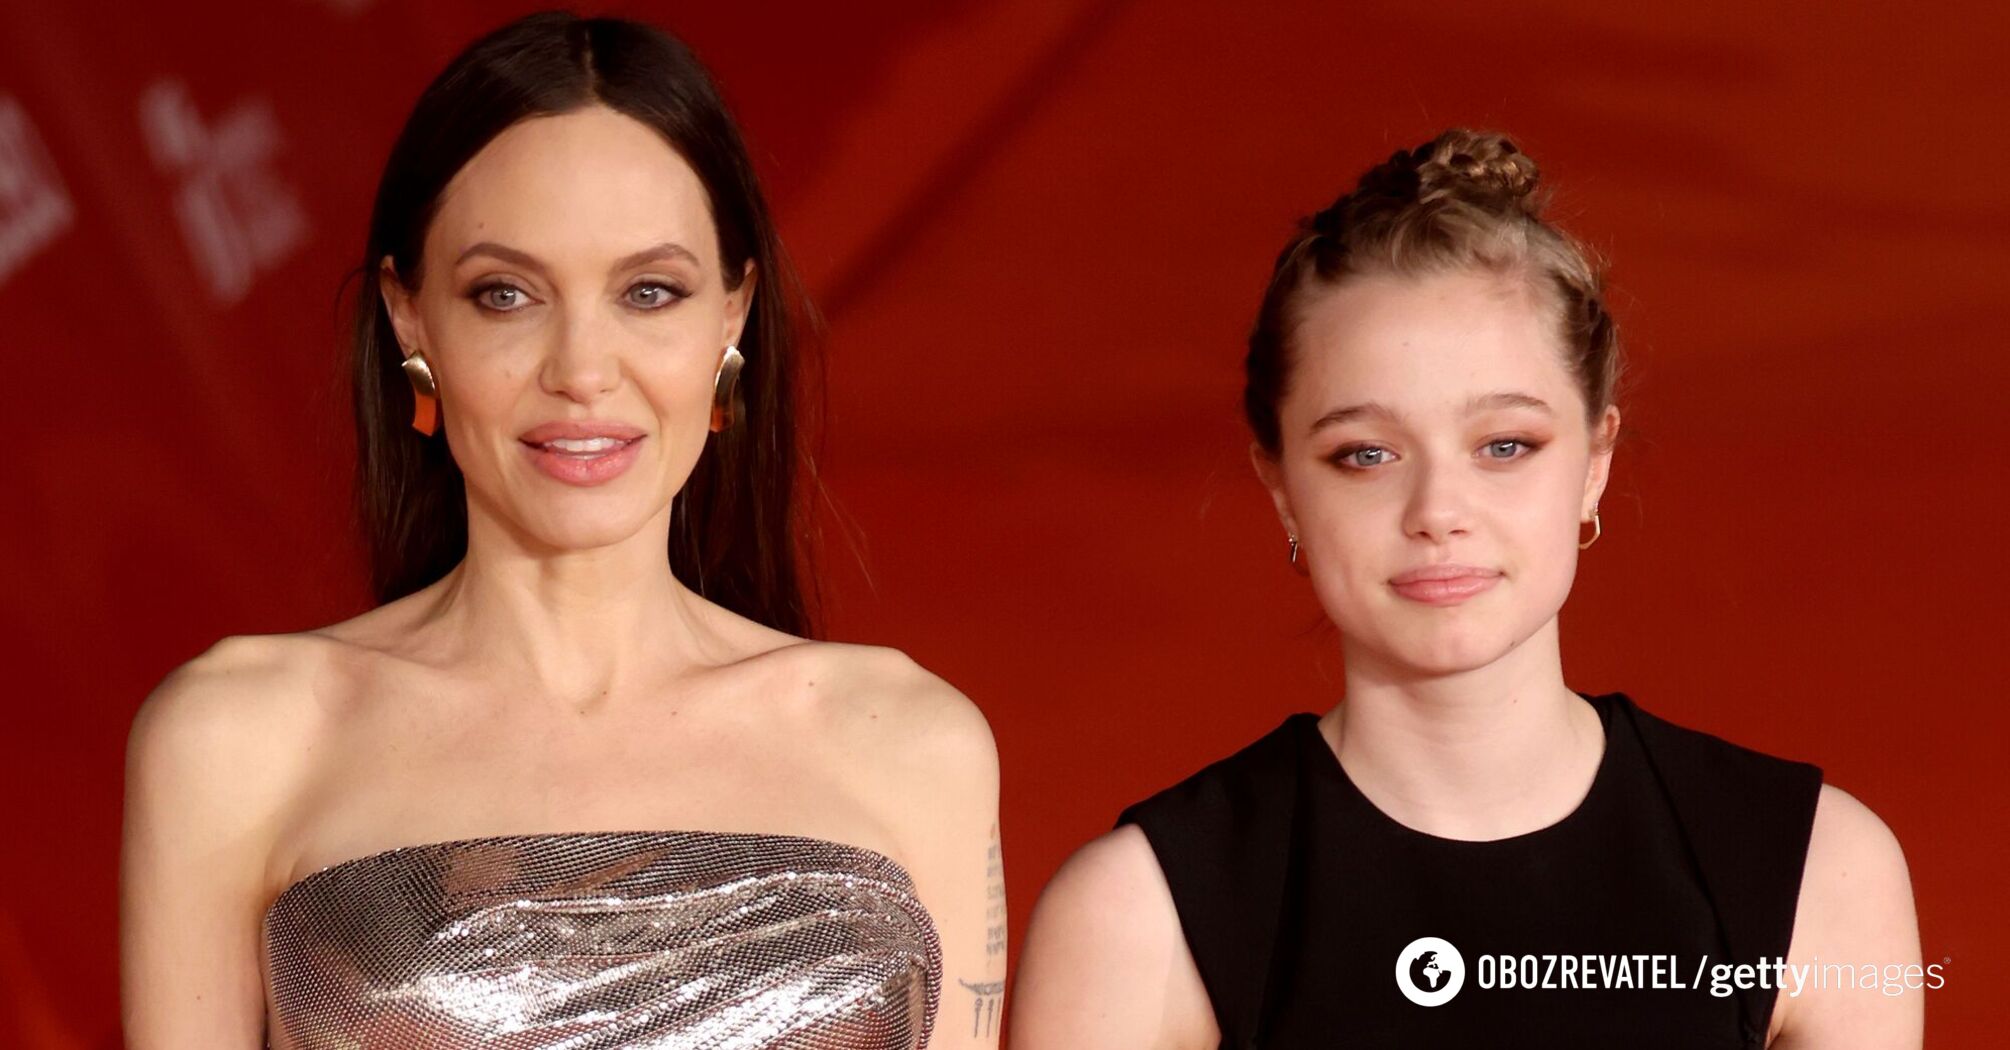 Daughter of Angelina Jolie and Brad Pitt Shiloh officially announces her father's surname abandonment